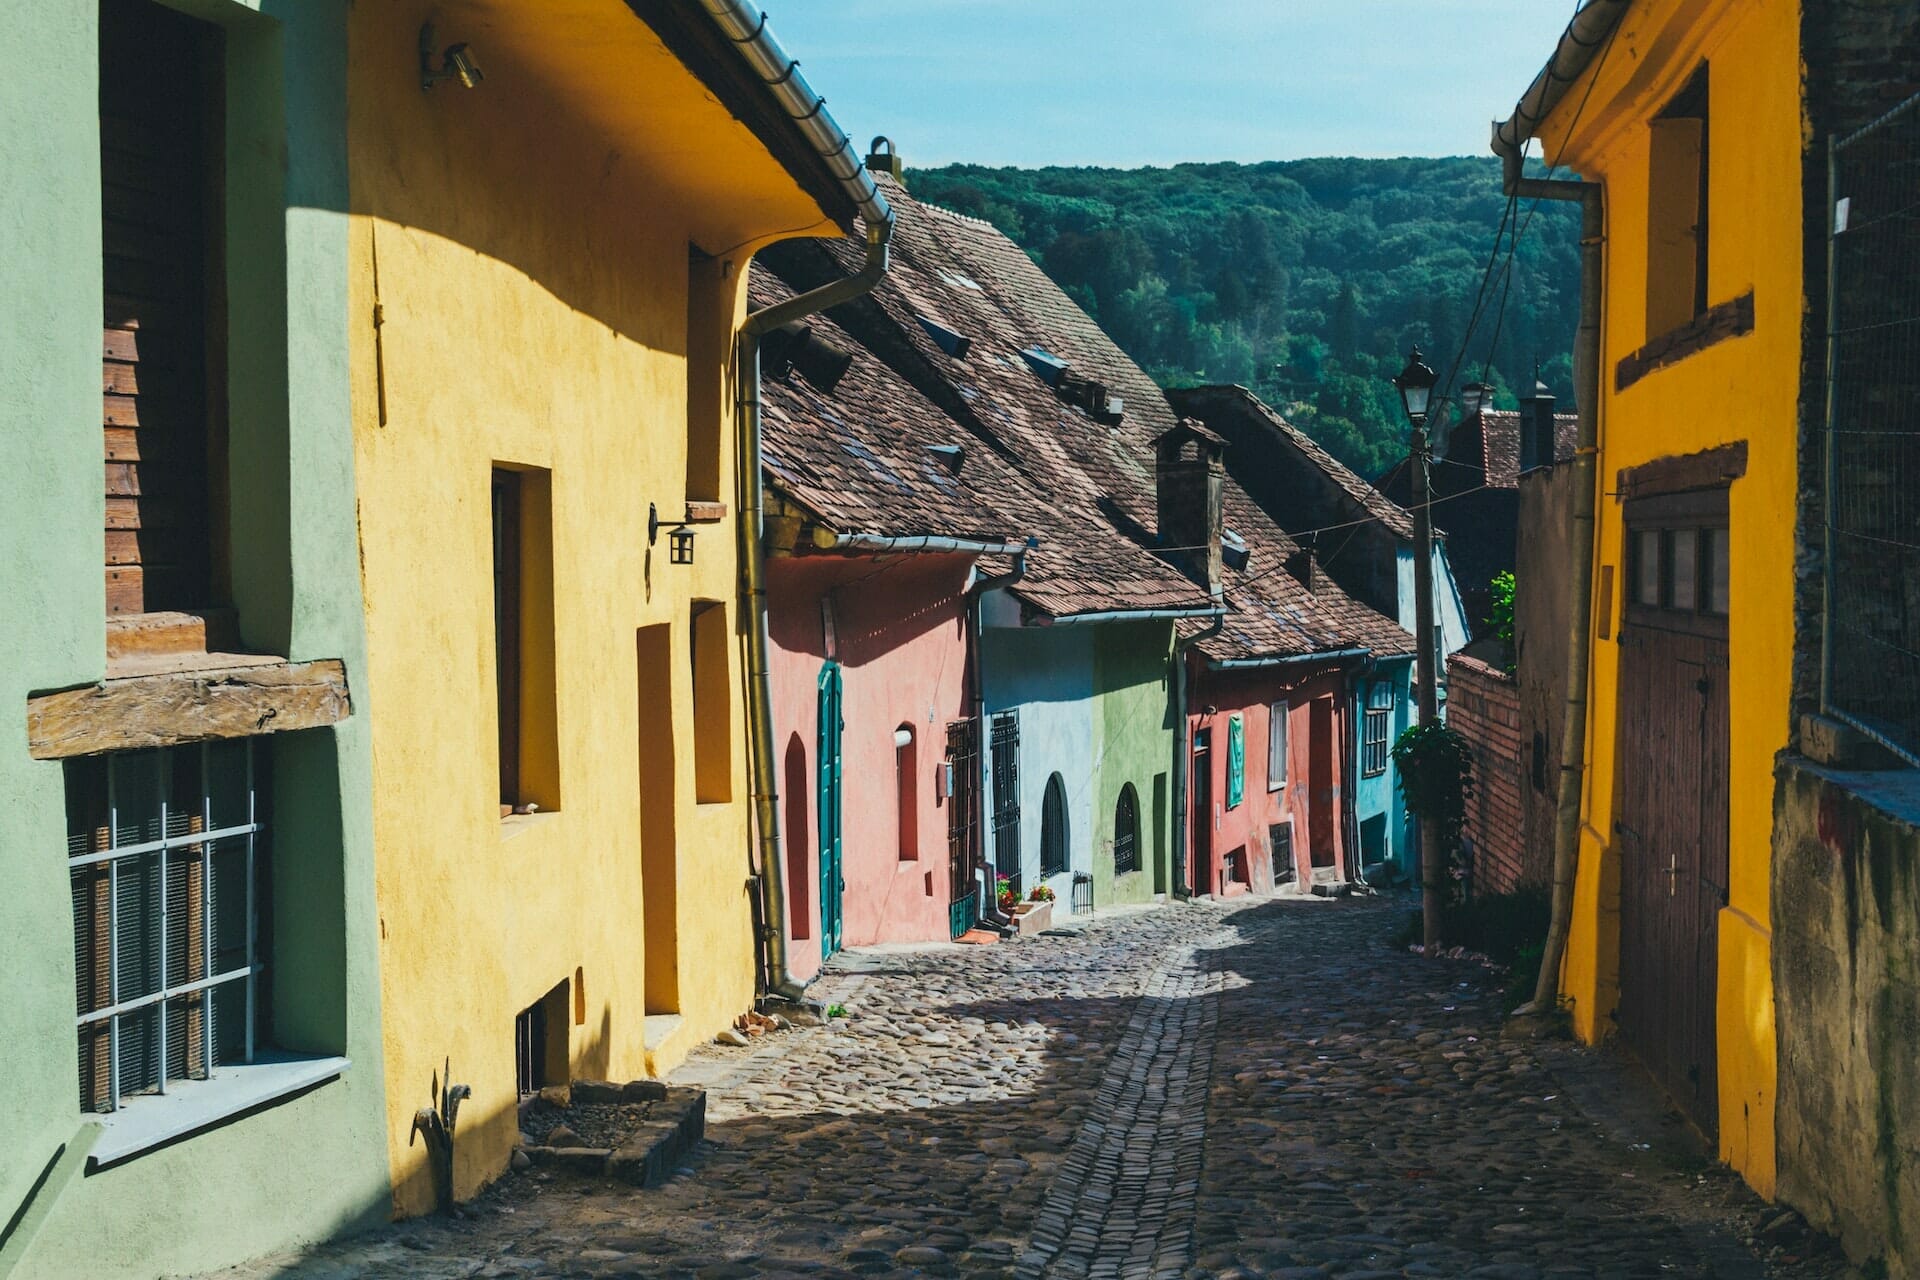 In this article, Robert Norman explores legalism and unhelpful traditions in Romania. This image pictures a Romanian village with colorful houses throughout the street.